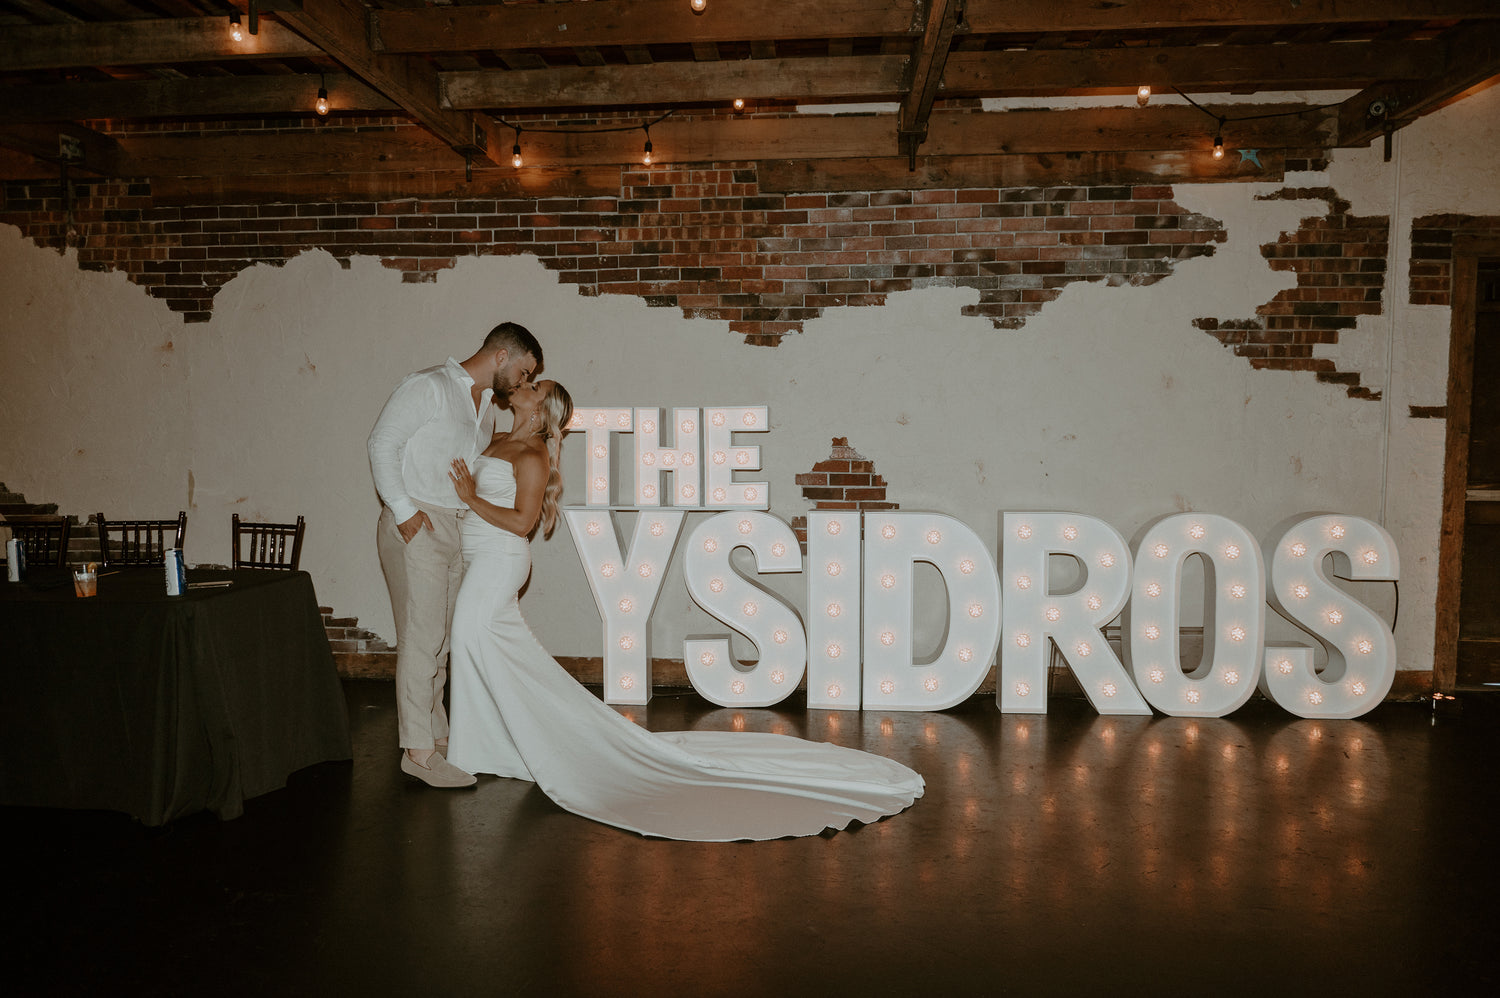 Charming Wichita, KS wedding scene featuring beautifully illuminated marquee letters, adding a touch of personalized magic to the celebration backdrop.